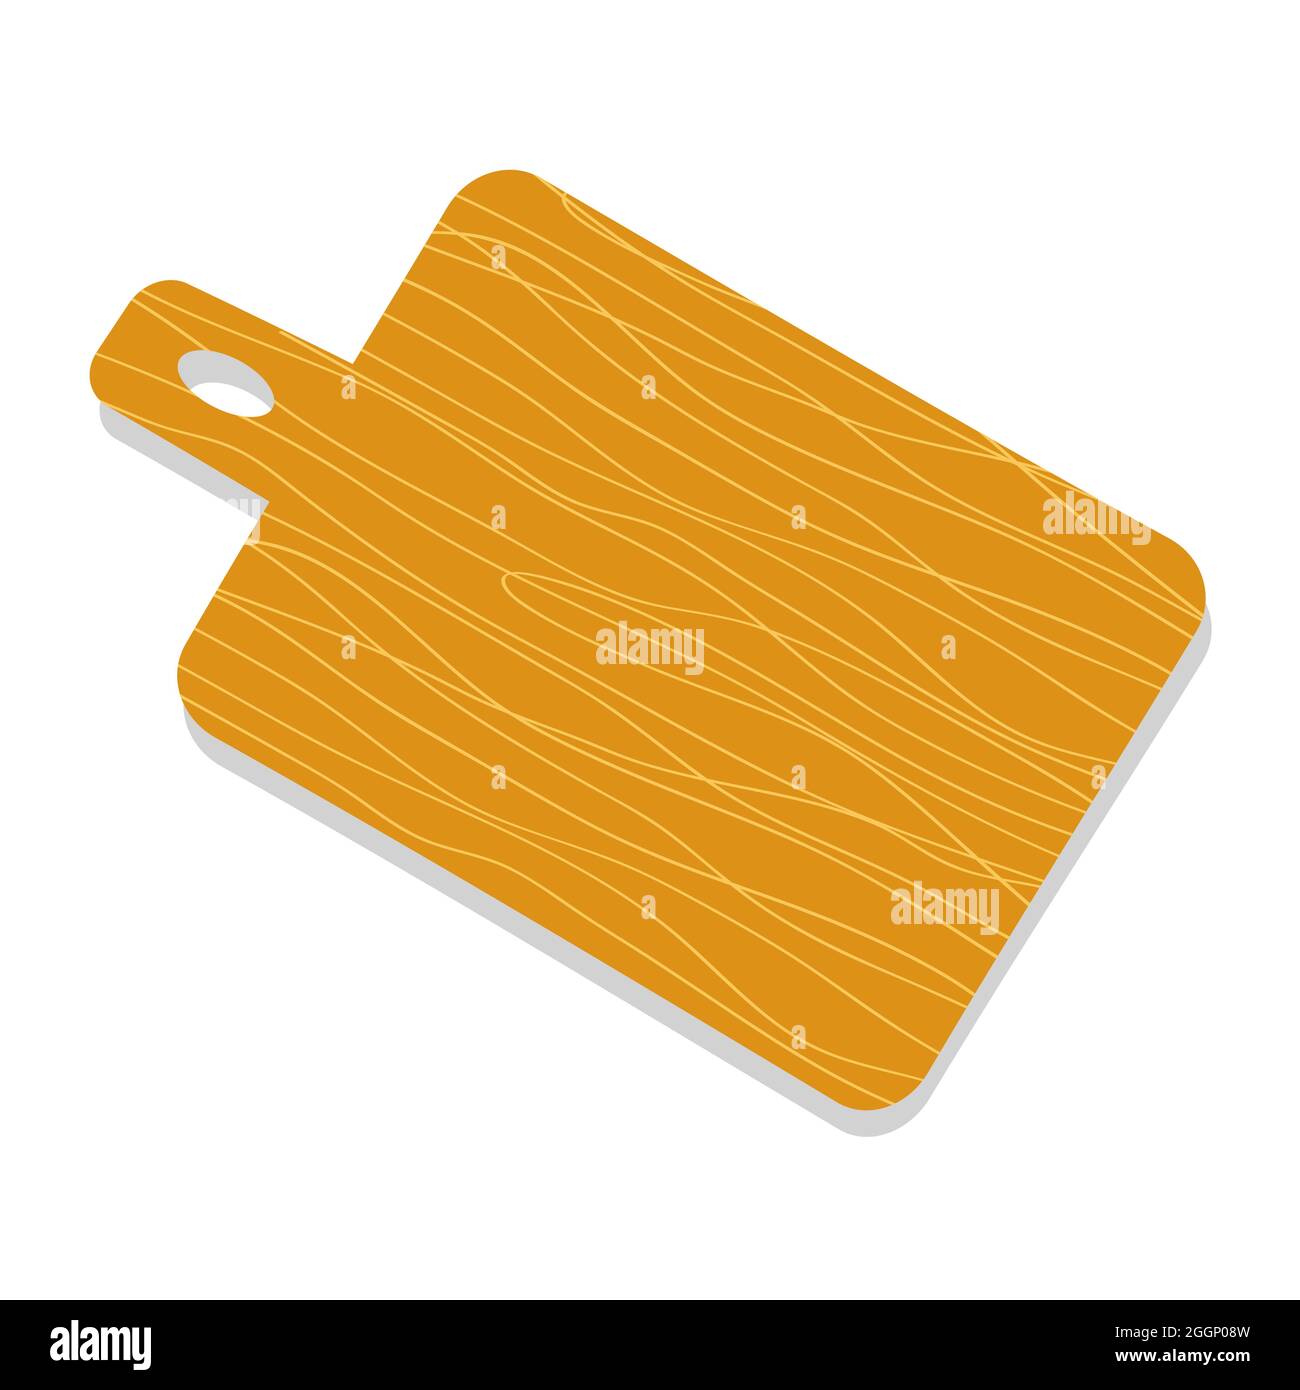 10,453 Sewing Board Images, Stock Photos, 3D objects, & Vectors